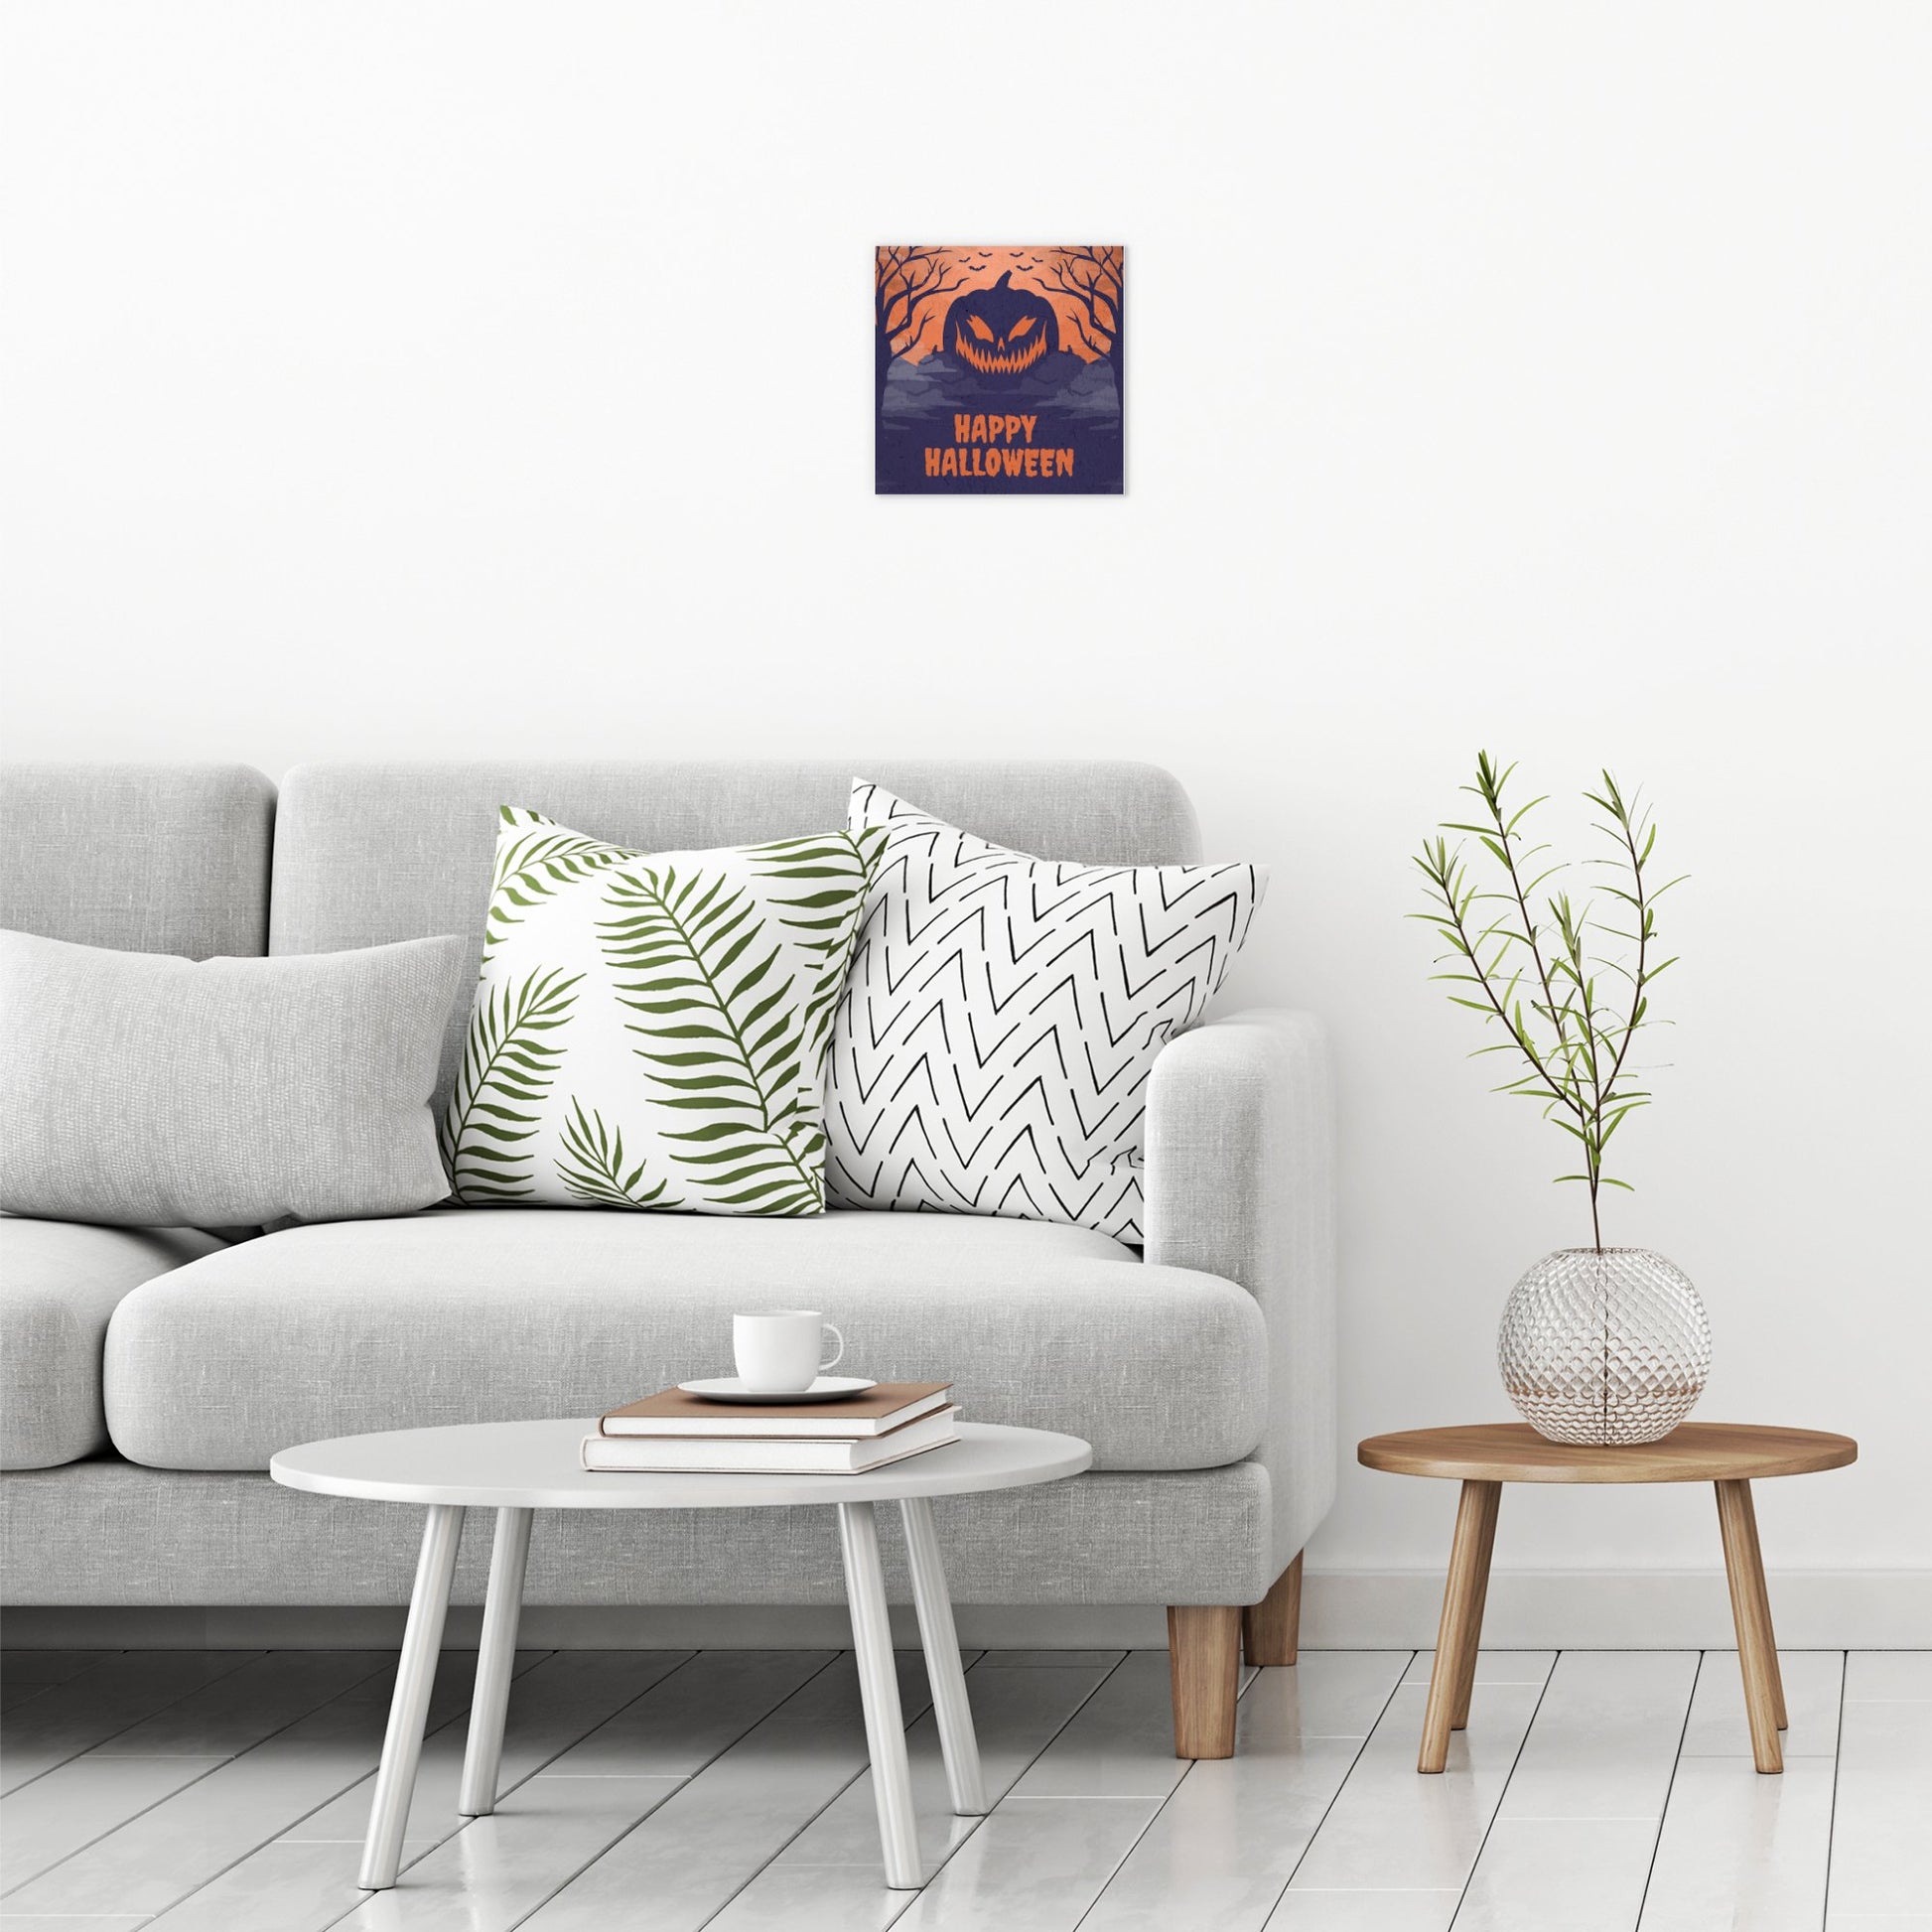 A contemporary modern room view showing a small size metal art poster display plate with printed design of a Happy Halloween Scary Pumpkin